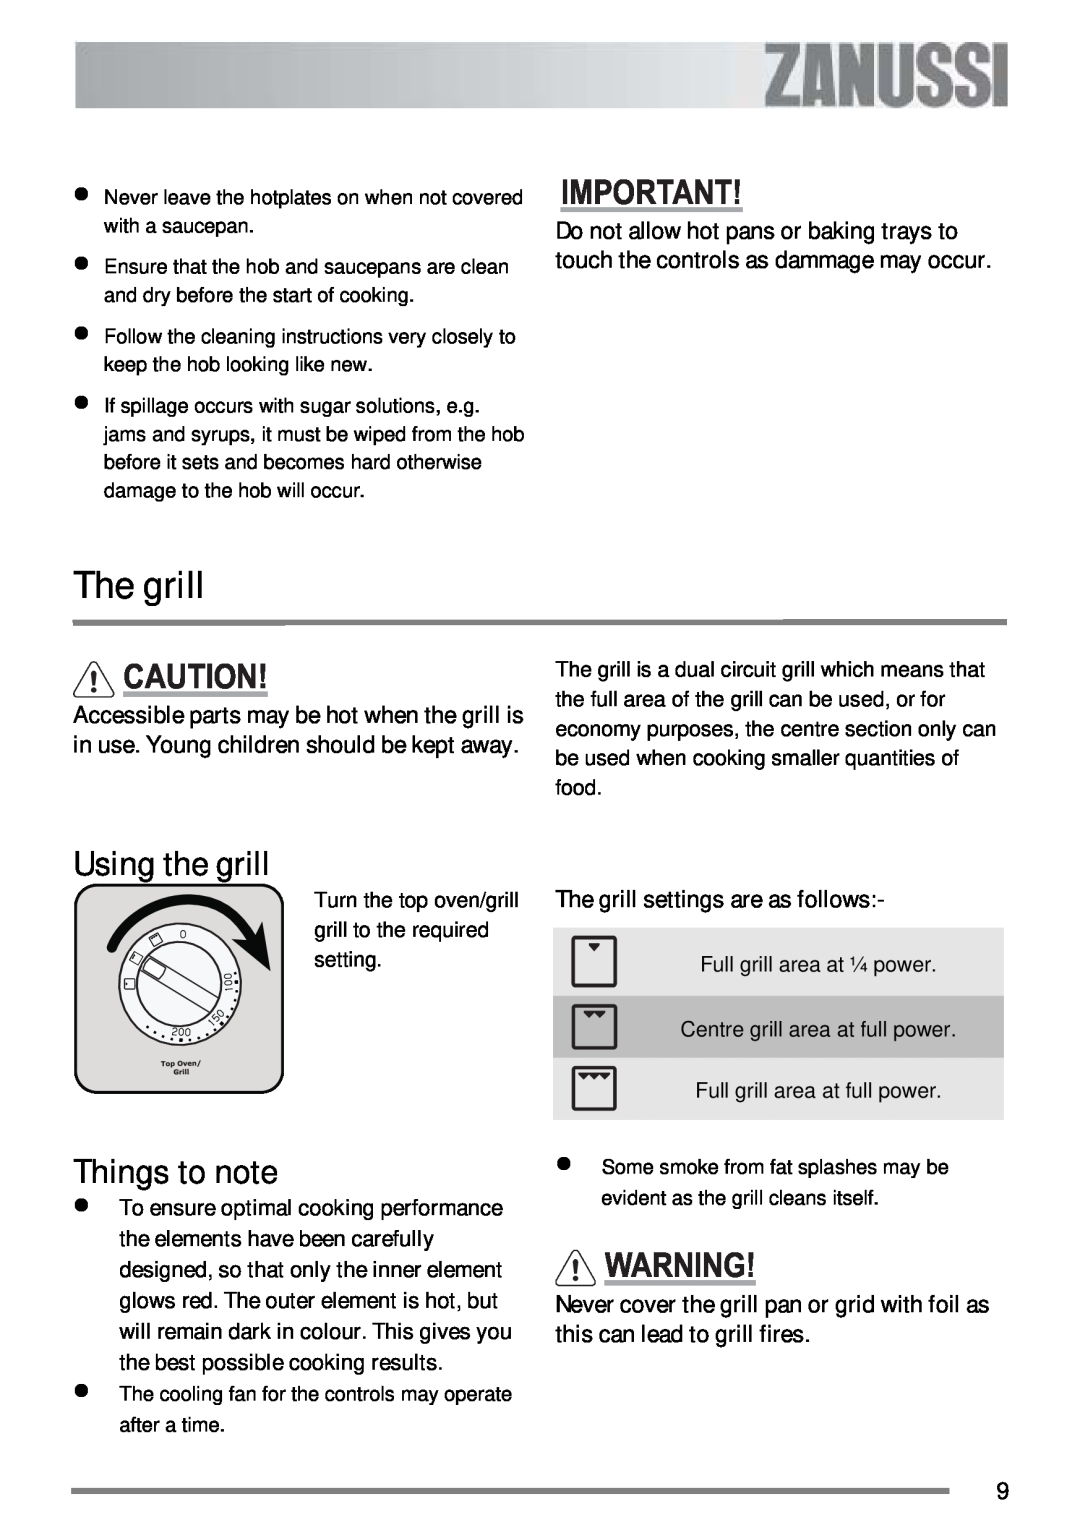 Zanussi ZKC 6000W user manual Using the grill, Things to note, The grill settings are as follows 